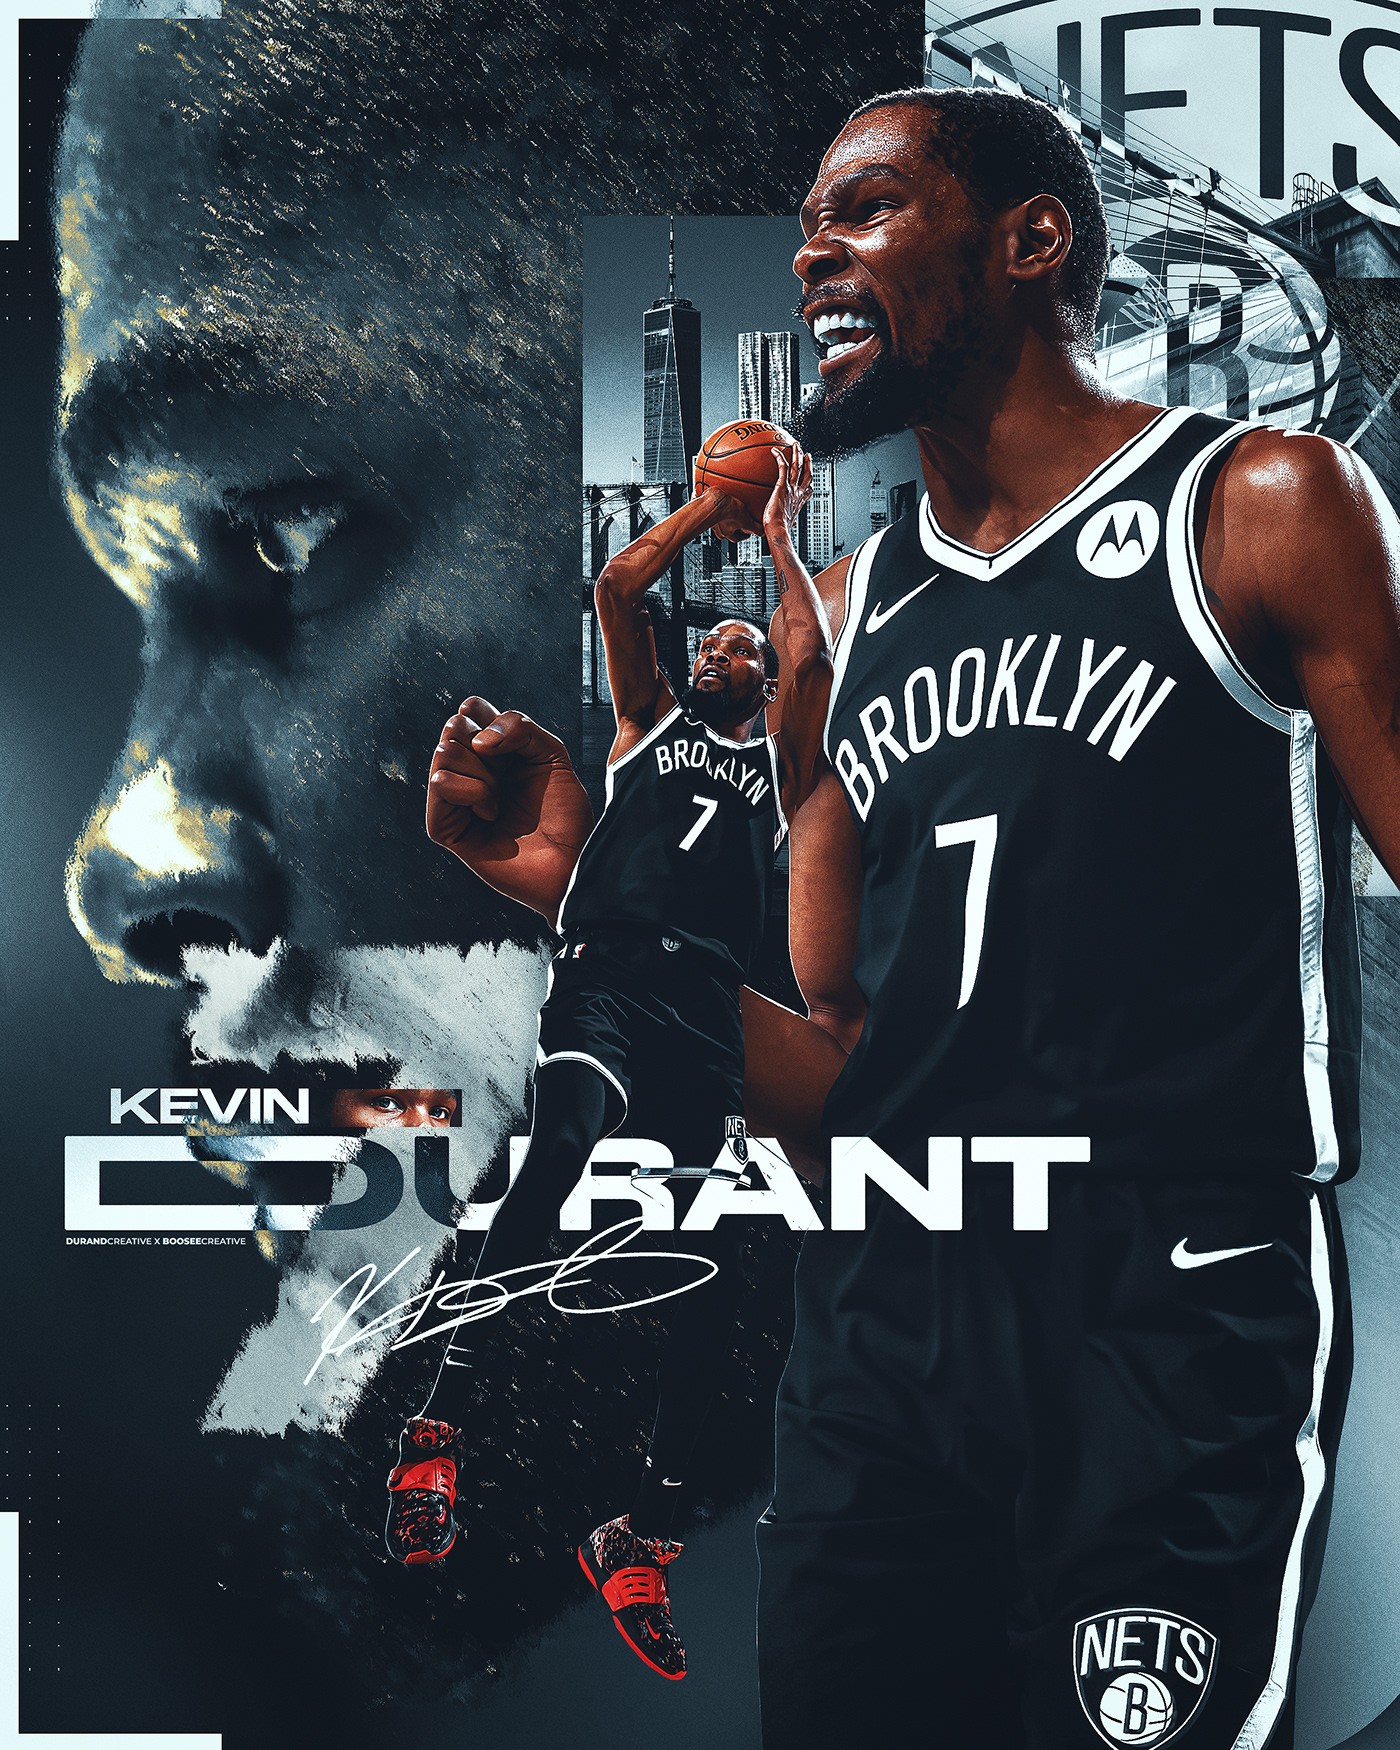 kevin durant NBA nets